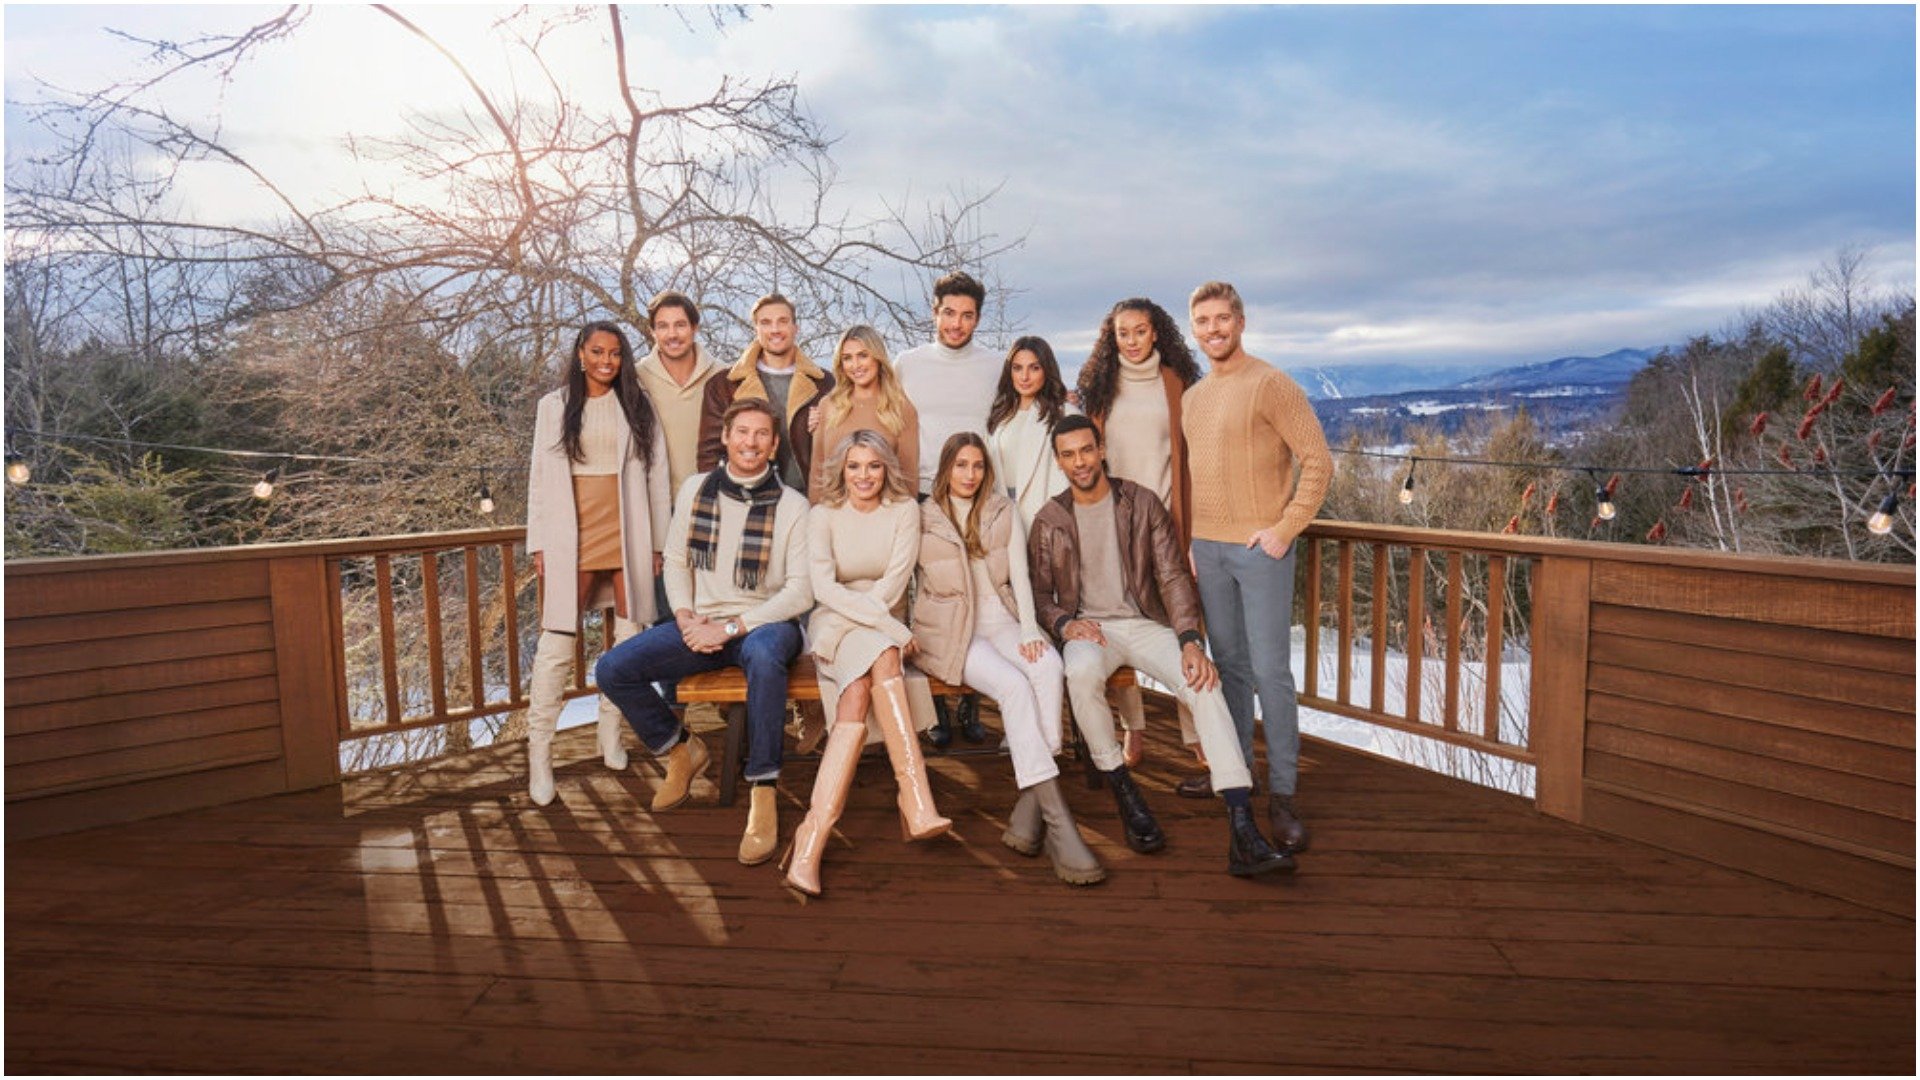 The Winter House cast will not have a reunion but storylines will continue on Summer House and Southern Charm